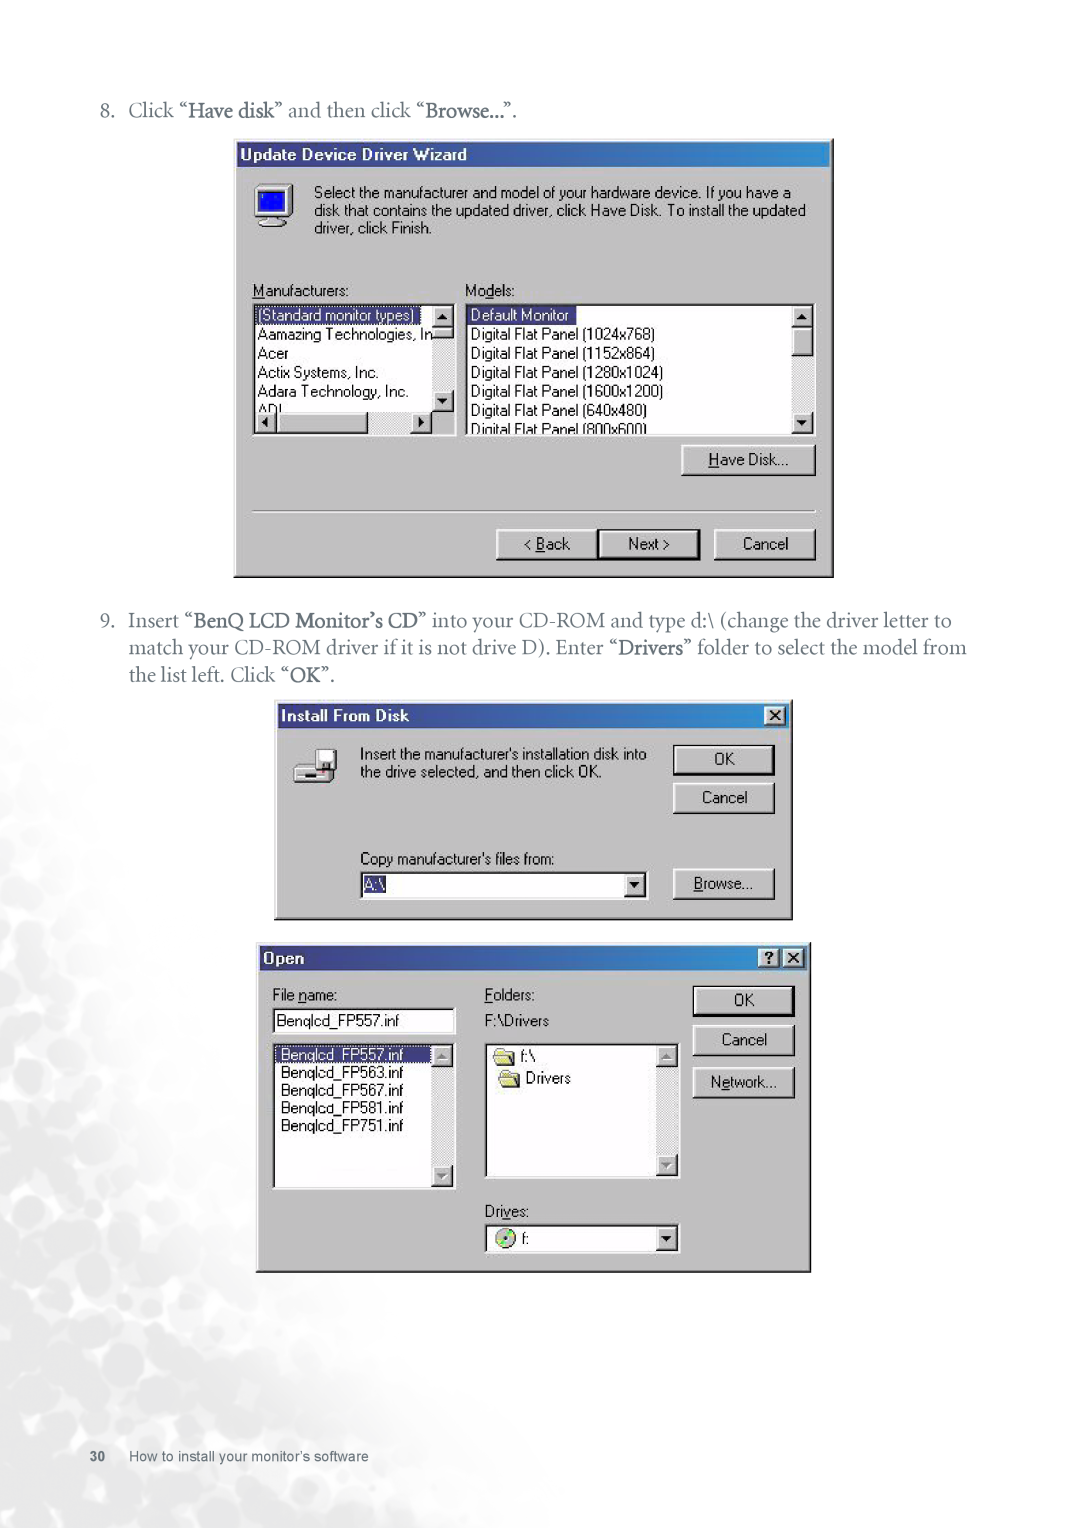 BenQ FP731 user manual Click “Have disk” and then click “Browse...”, How to install your monitor’s software 